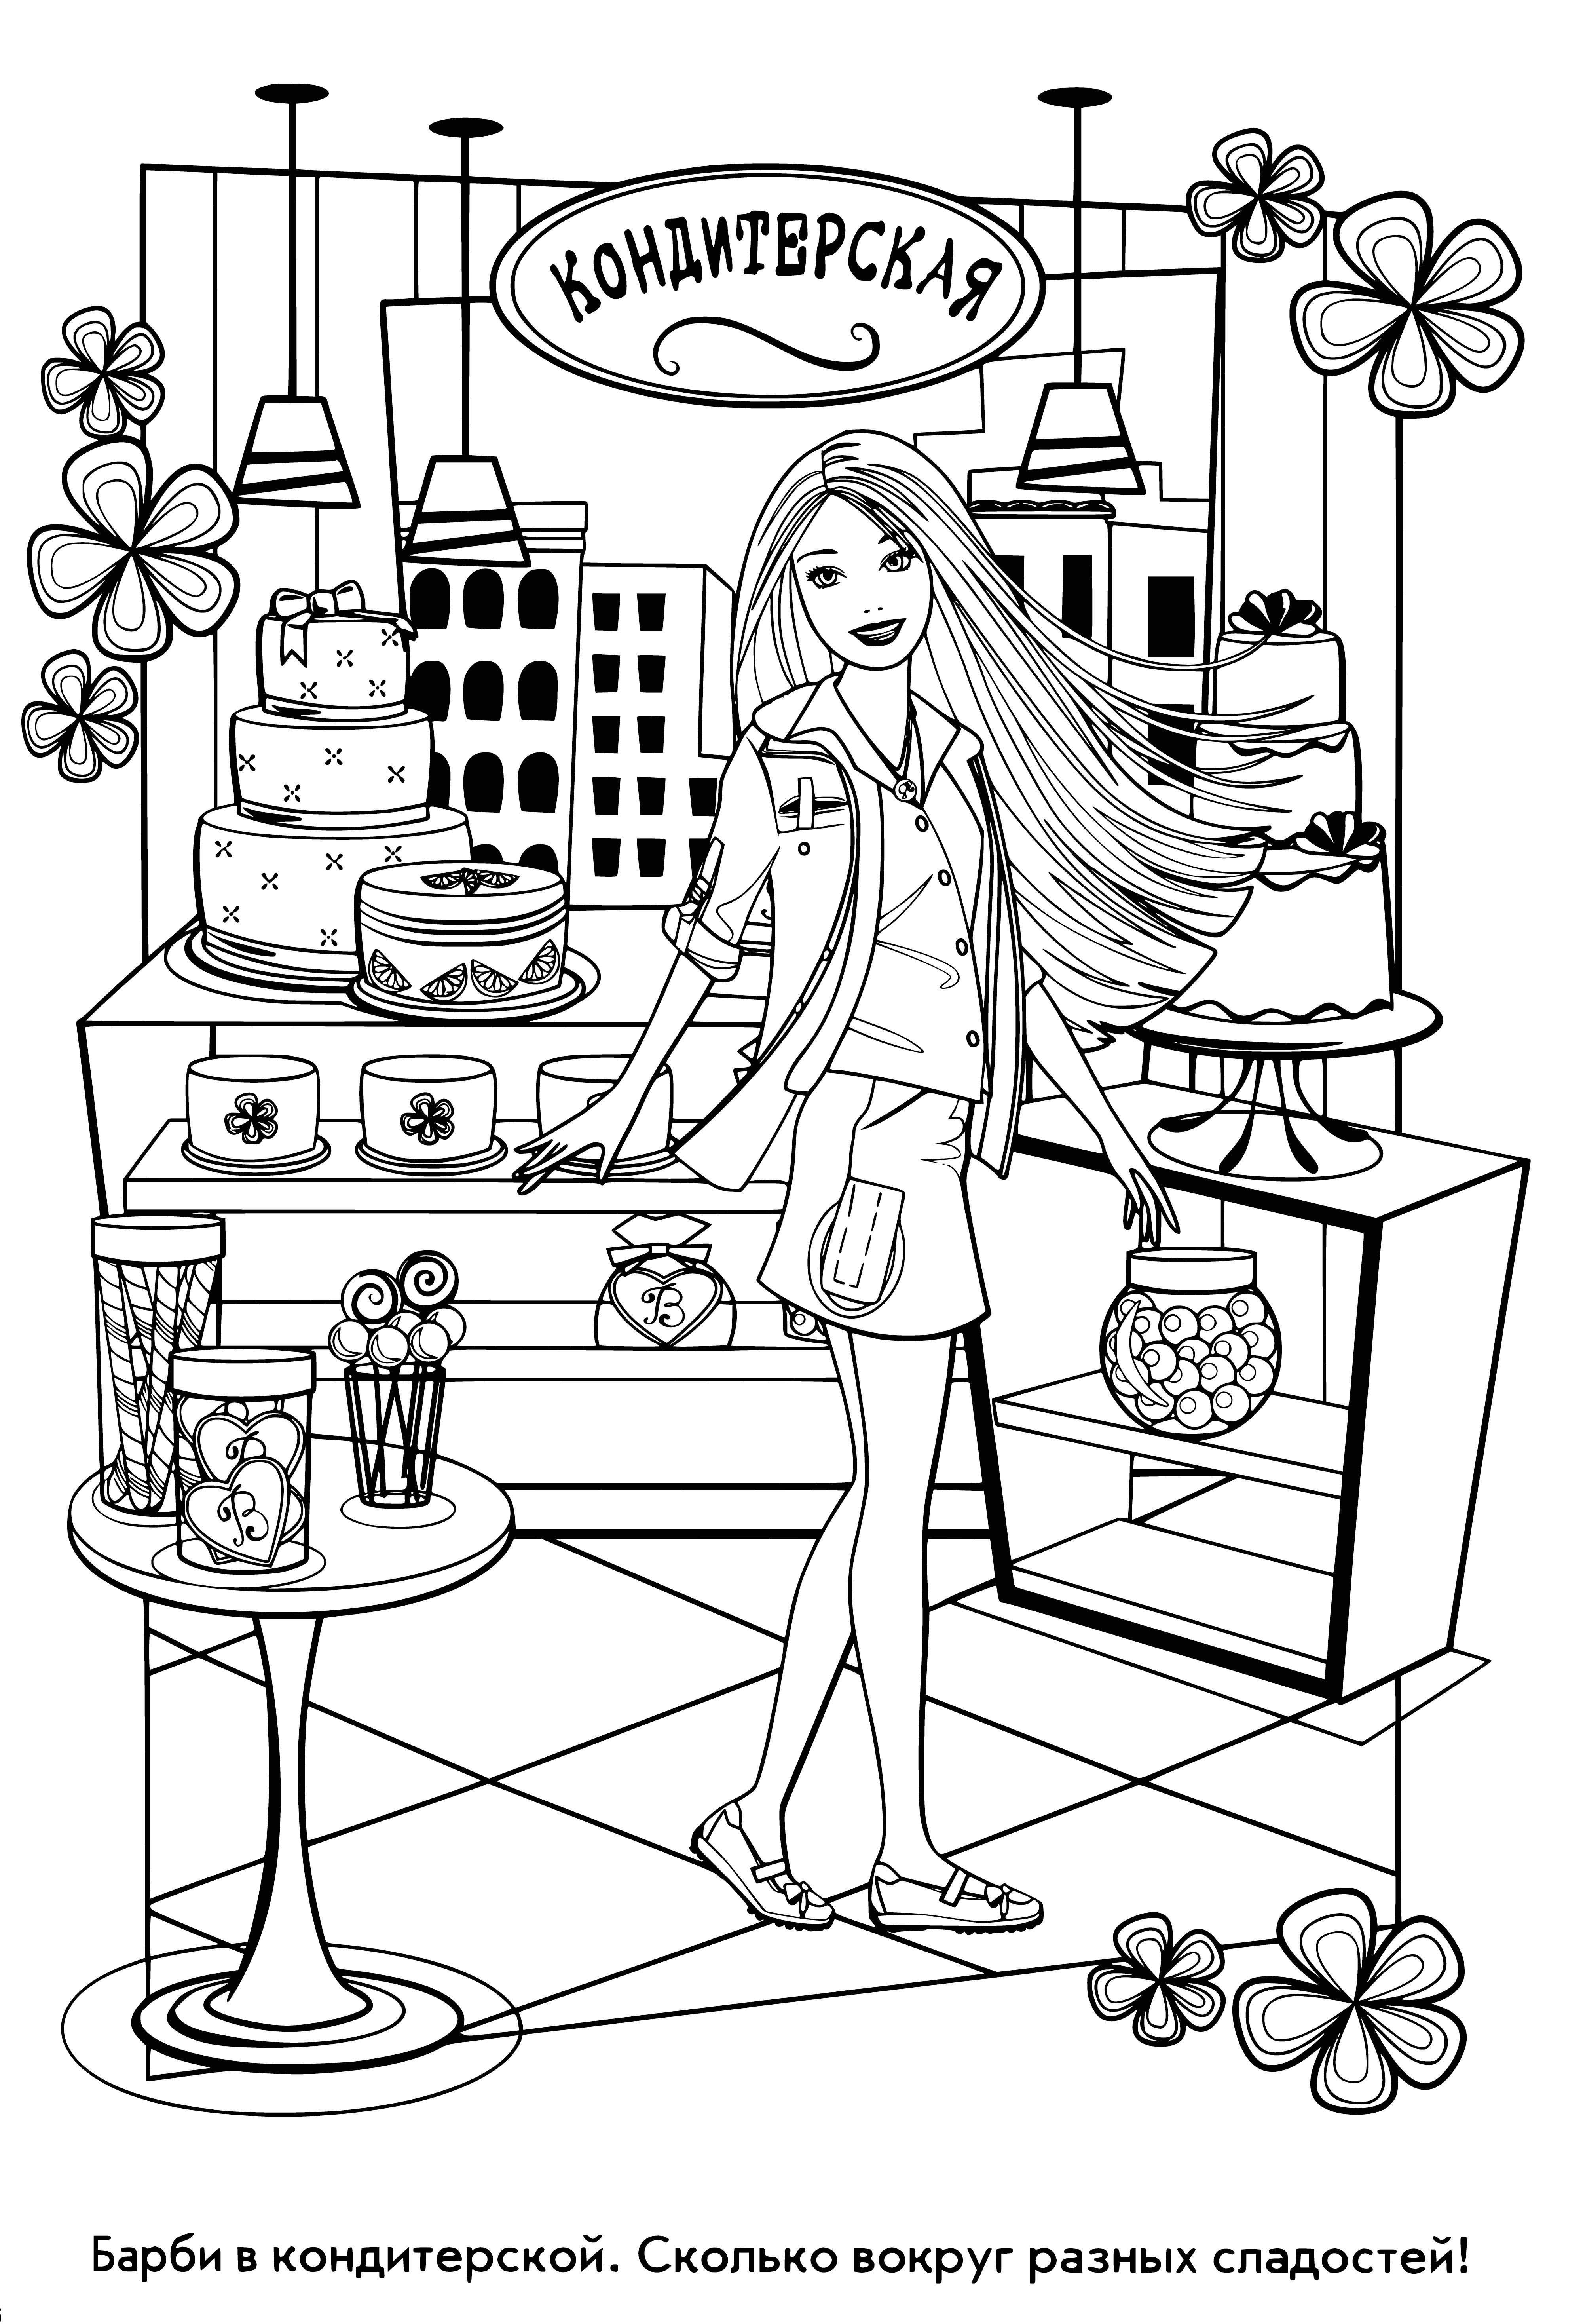 coloring page: Barbie in candy store, long blond hair, pink polka dot dress, holding lollipop, next to colorful candy display.